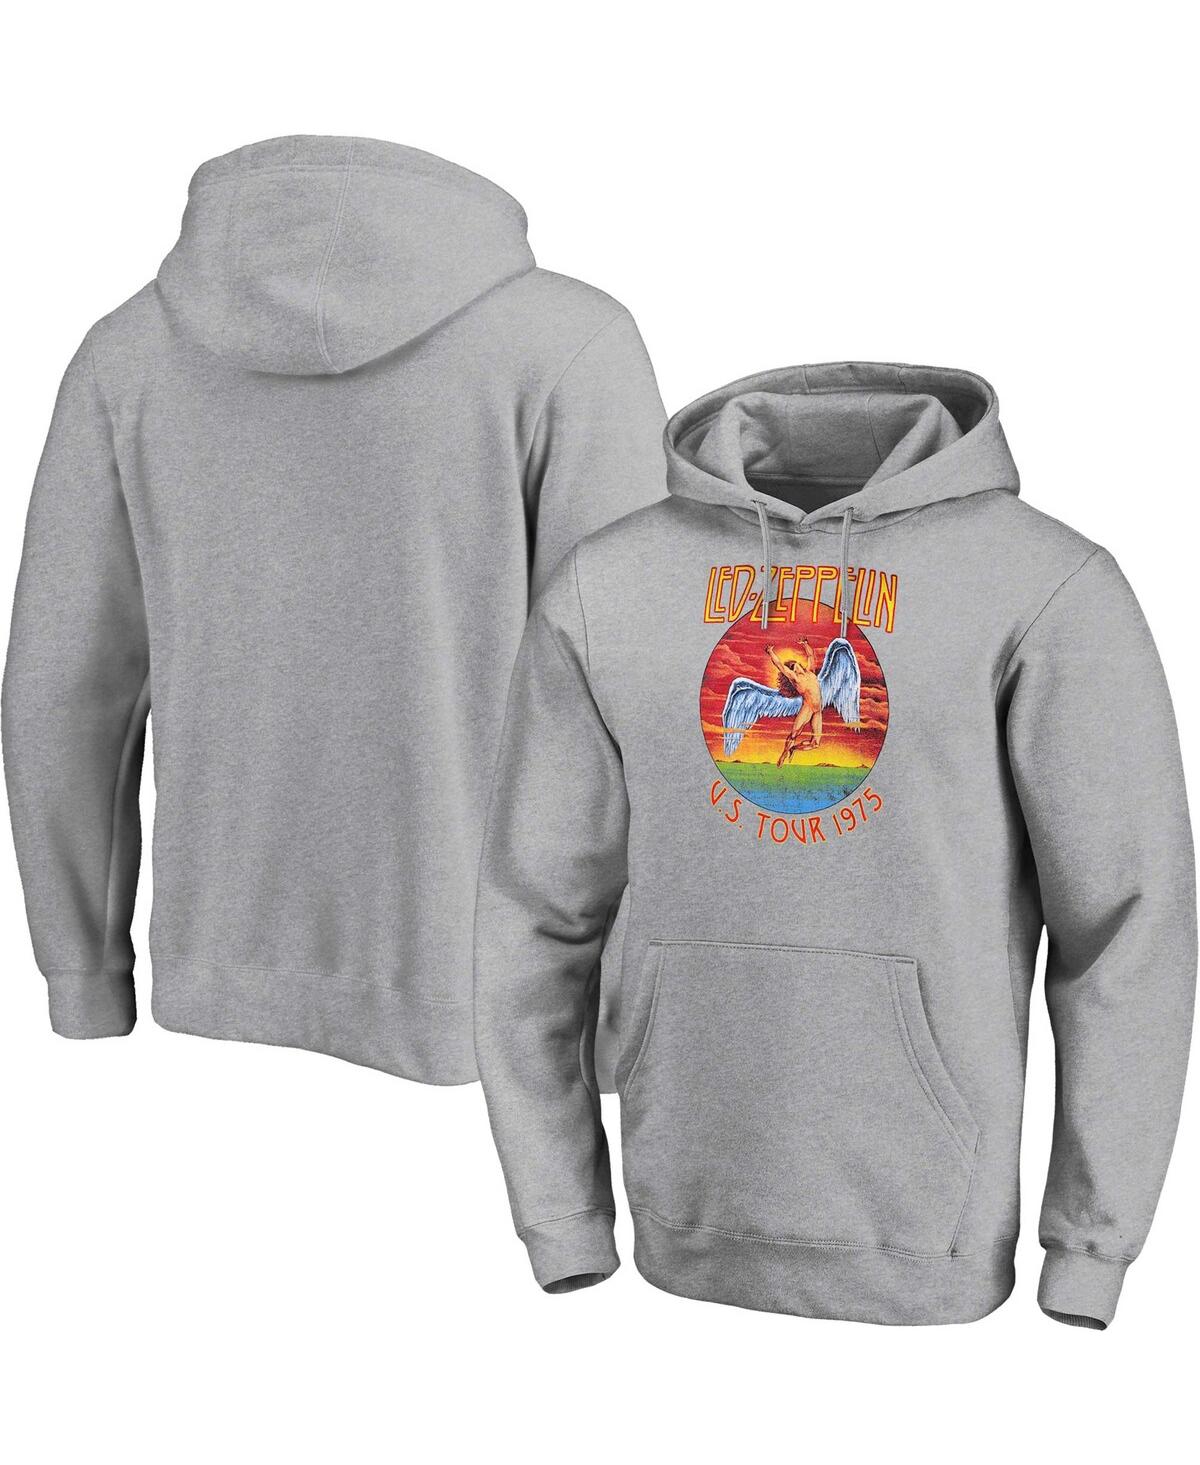 Men's and Women's Led Zeppelin Heather Gray Graphic Pullover Hoodie - Heather Gray